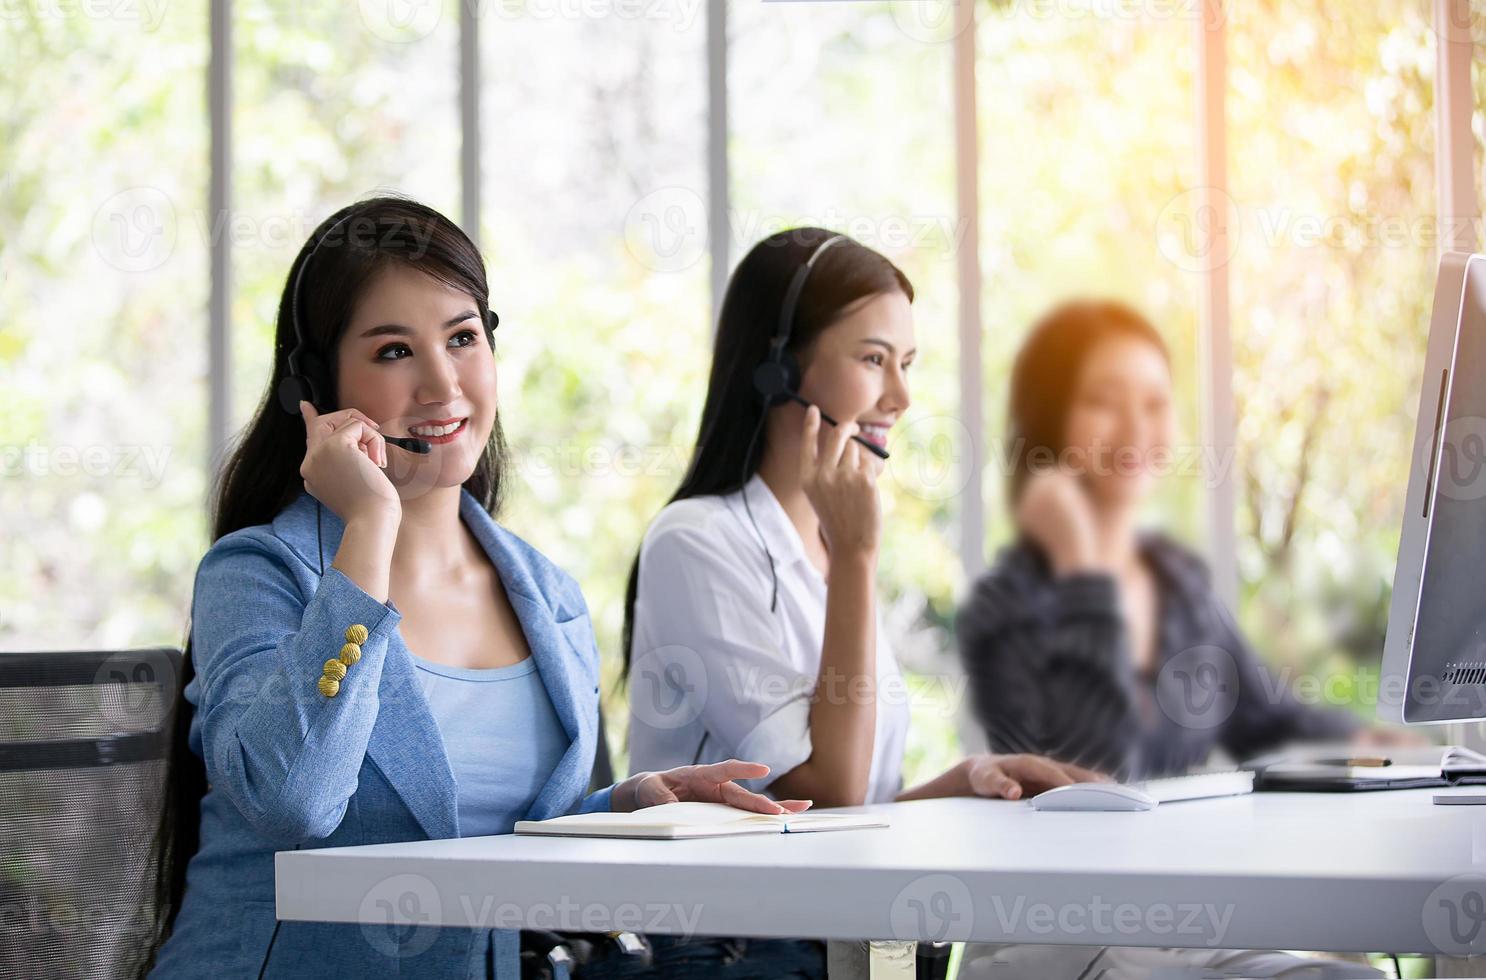 Service Team Concept. Operator or Contact Center Sale in Office, Information People Call Center, Quality Professional Team Sales Support Office. Environment Workplace Representative Company. photo